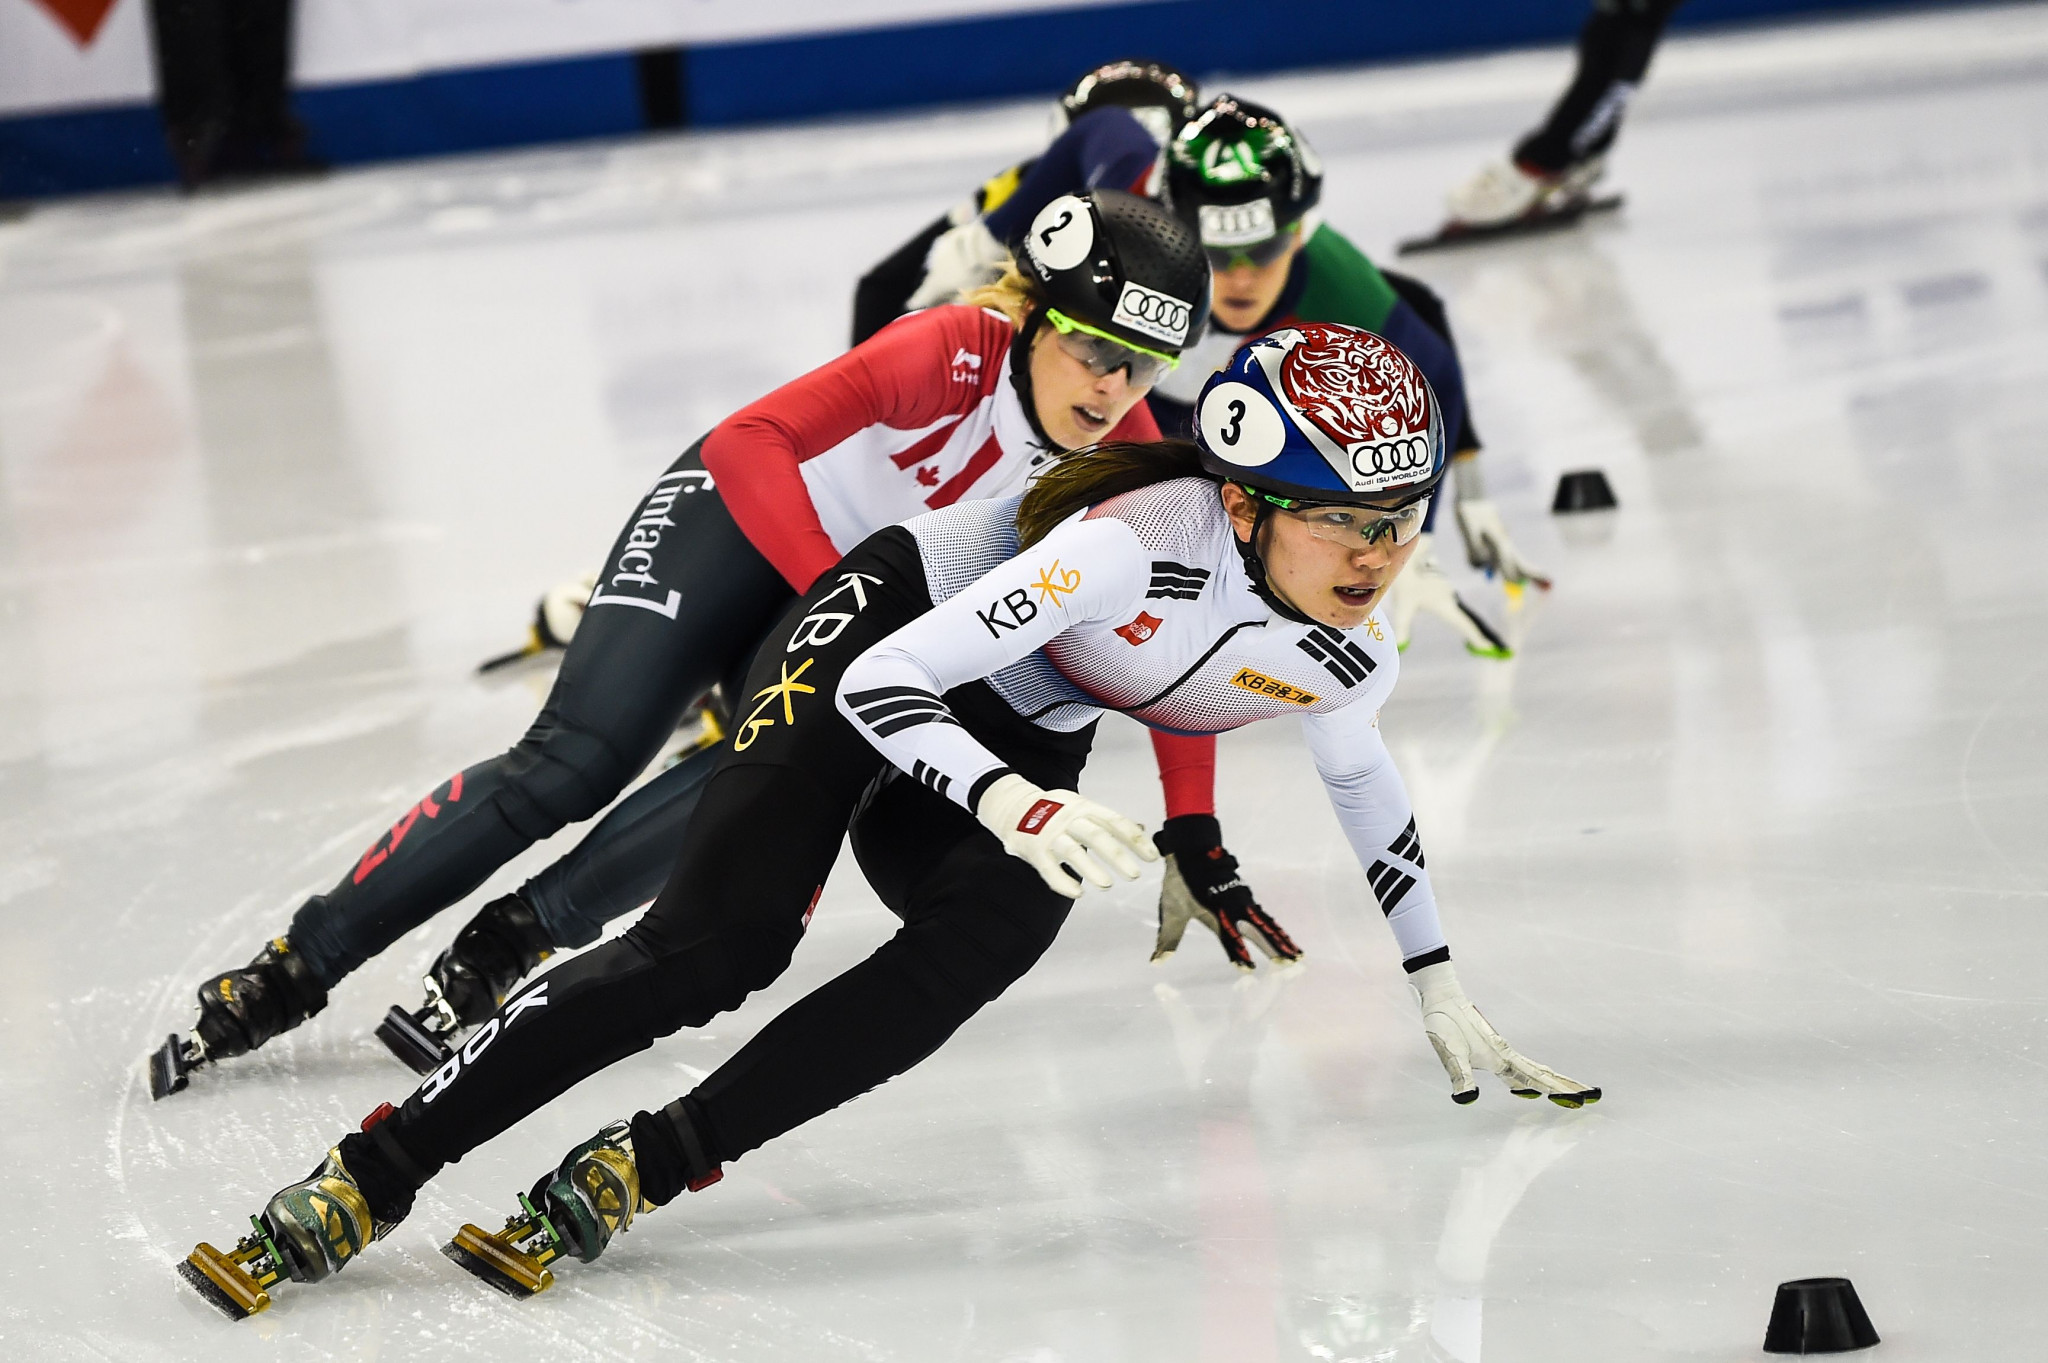 Choi and Shim win qualification heats to reach quarter-finals at ISU Short Track World Cup